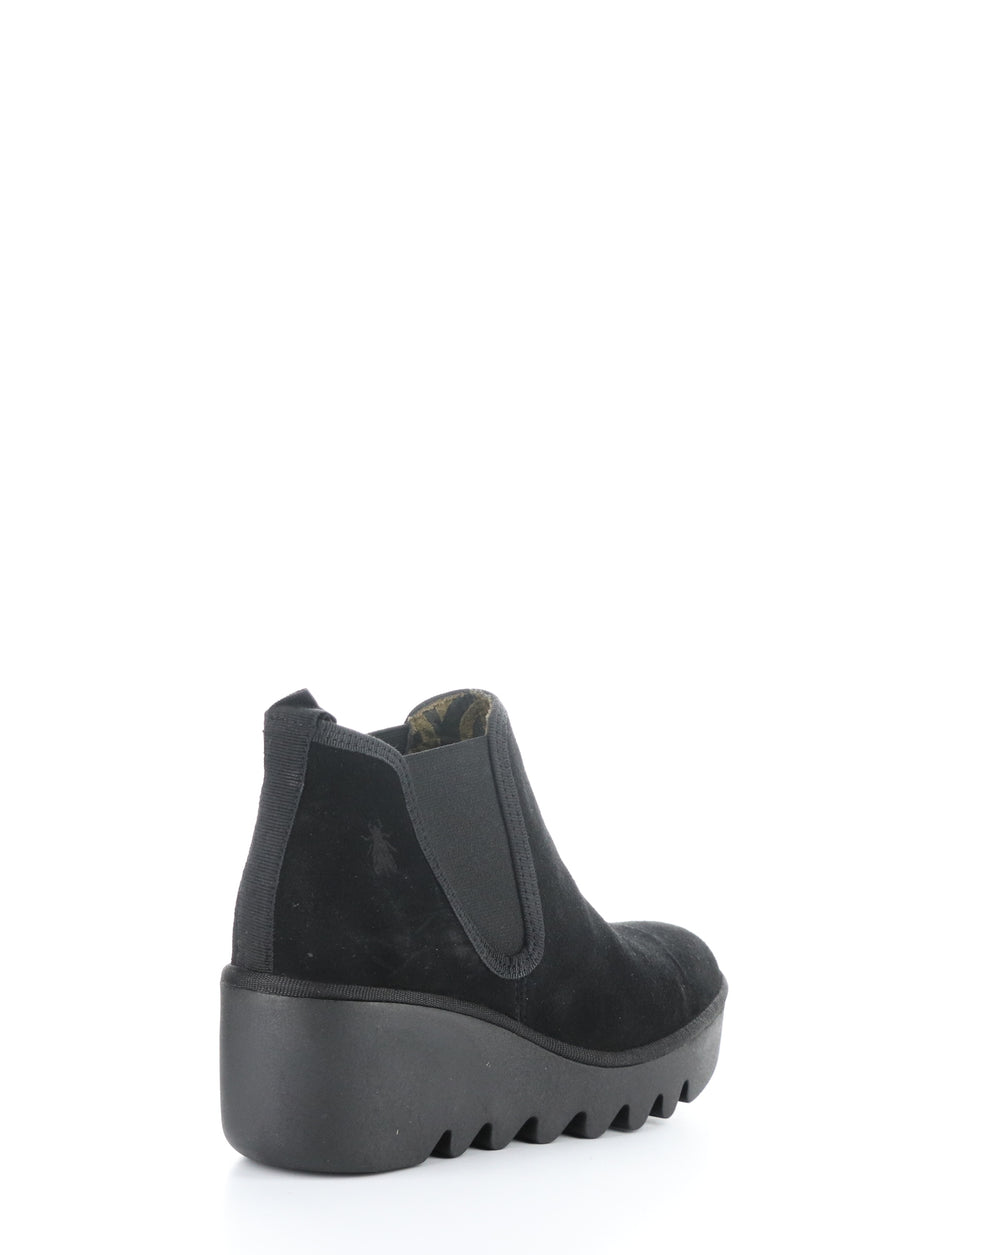 BYNE349FLY 019 BLACK Elasticated Boots